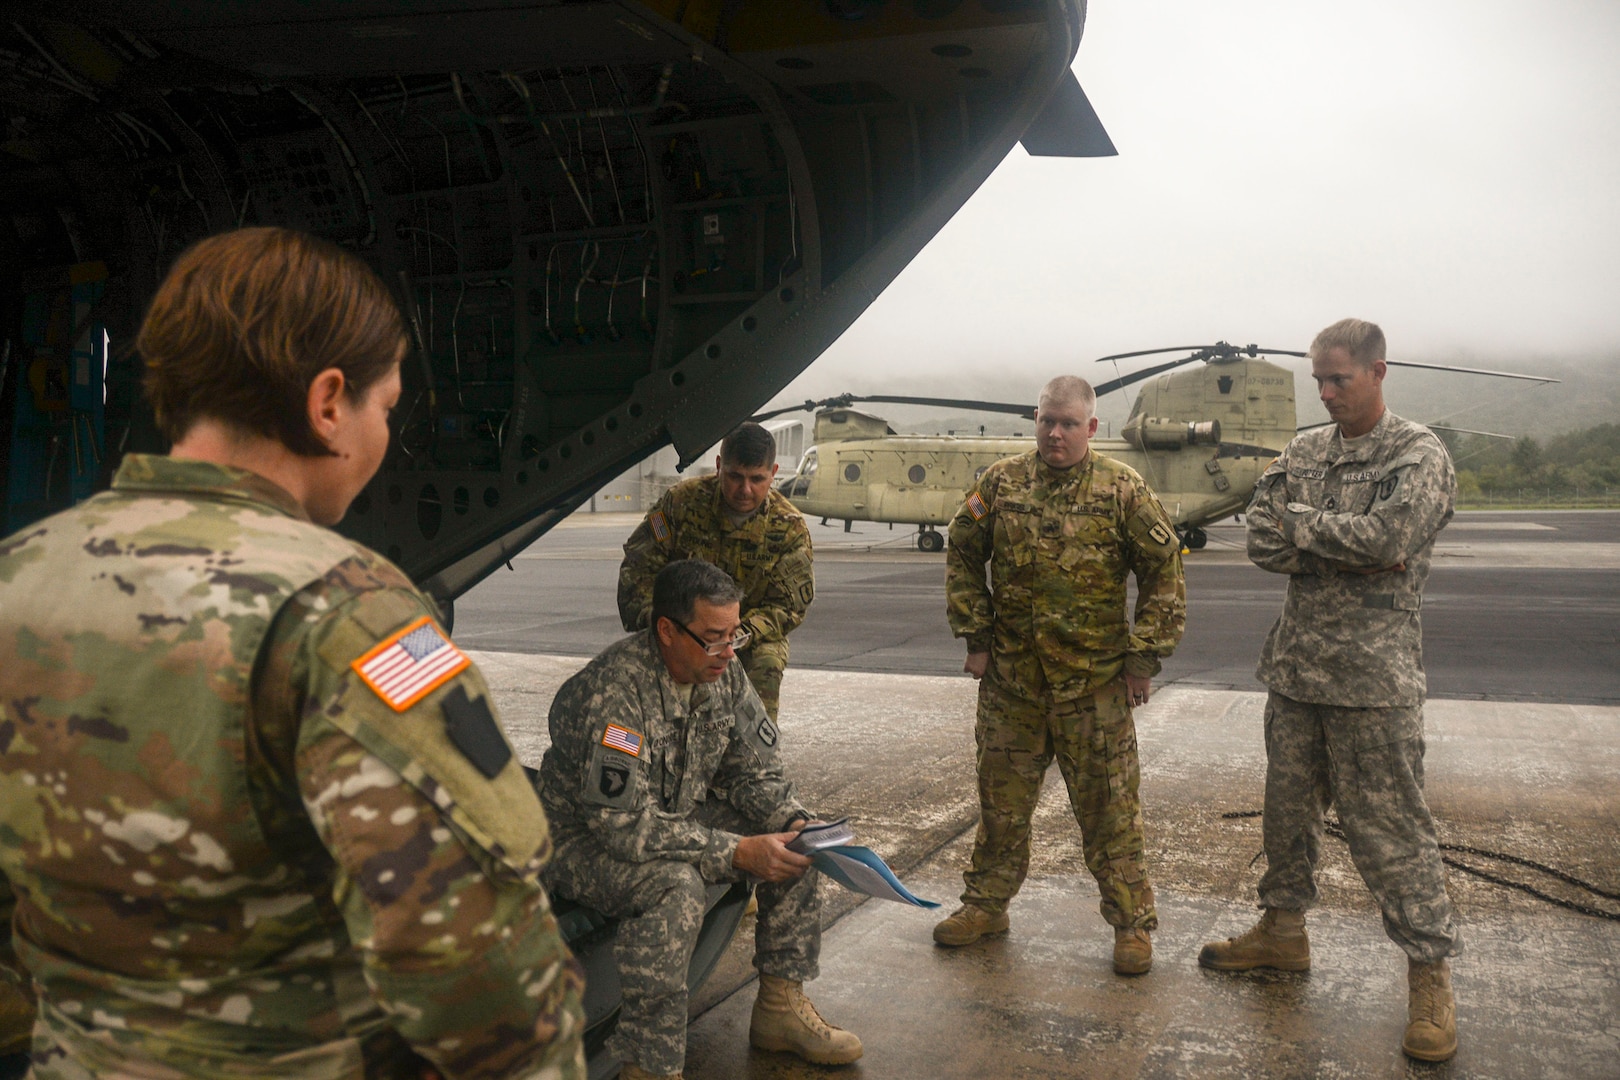 Chief Warrant Officer 4 Patrick Donohue, a CH-47 Chinook pilot with the Eastern Army Aviation Training Site (EAATS) briefs his crew before takeoff Sept. 13, 2018, from Muir Army Airfield at Fort Indiantown Gap, Pennsylvania. Approximately 25 Pennsylvania Guard members in two Chinooks and two UH-56 Black Hawk helicopters are bound for South Carolina in support of Hurricane Florence recovery efforts.